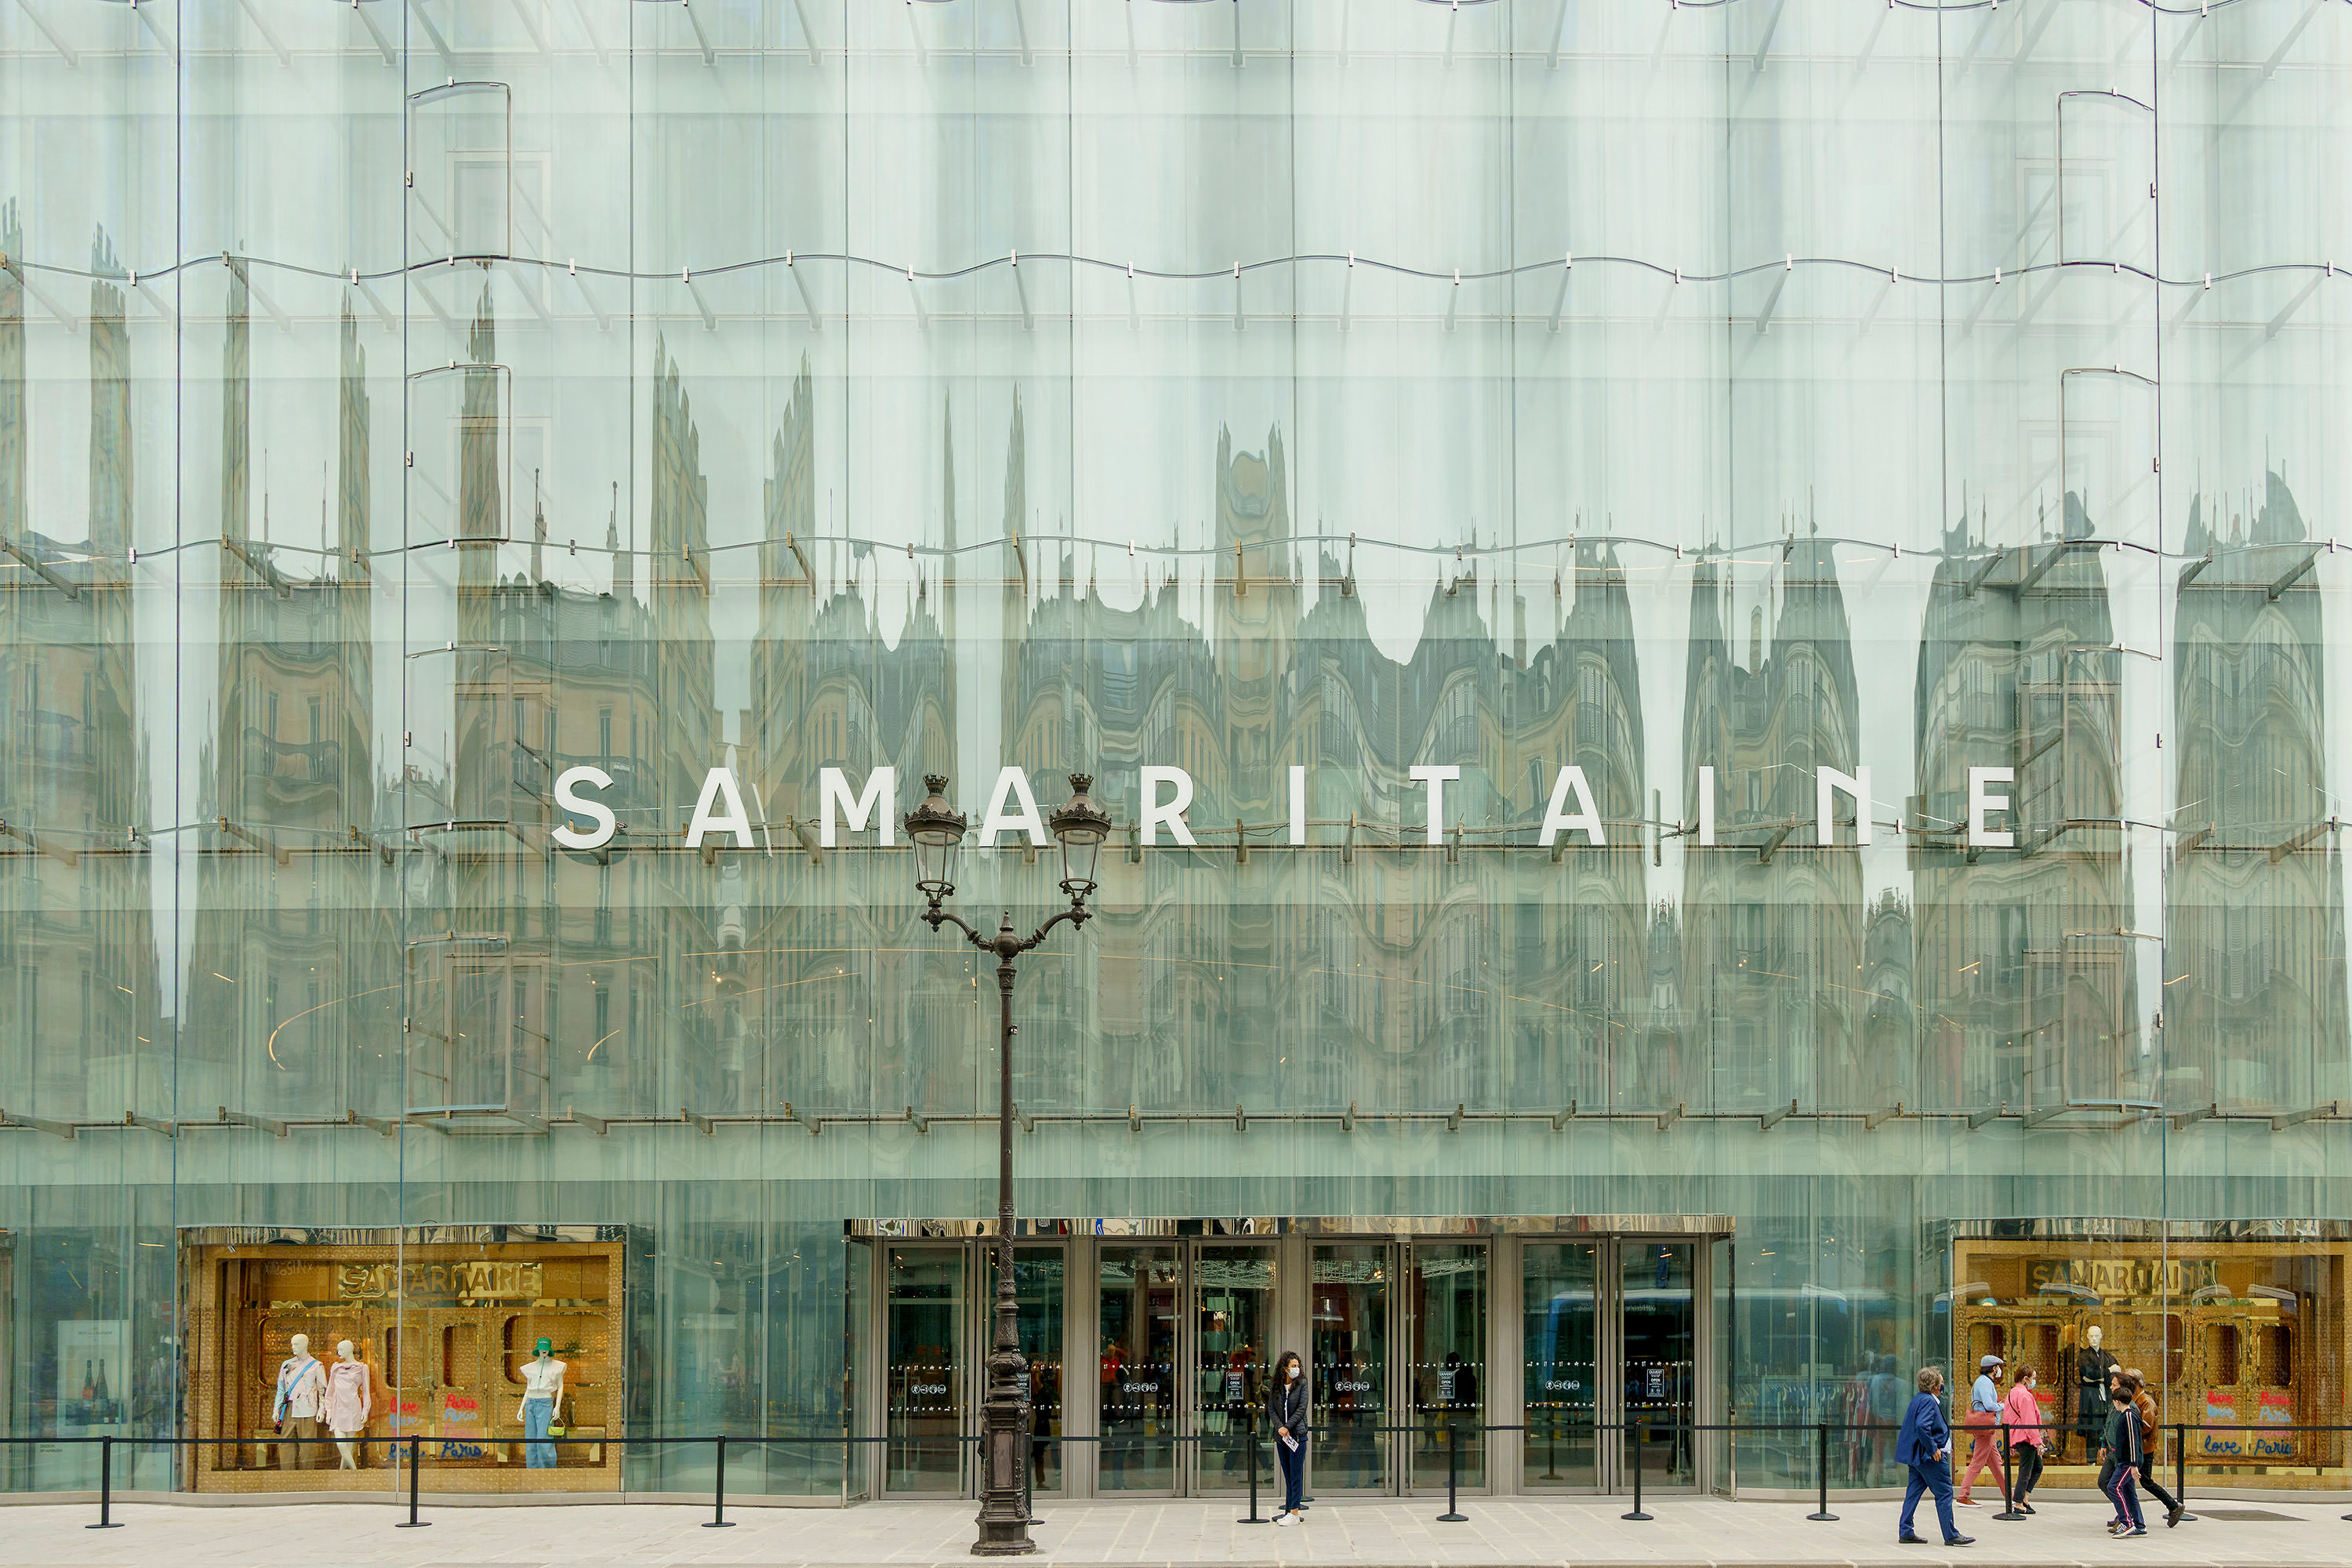 La Samaritaine: The Story Behind the Legend